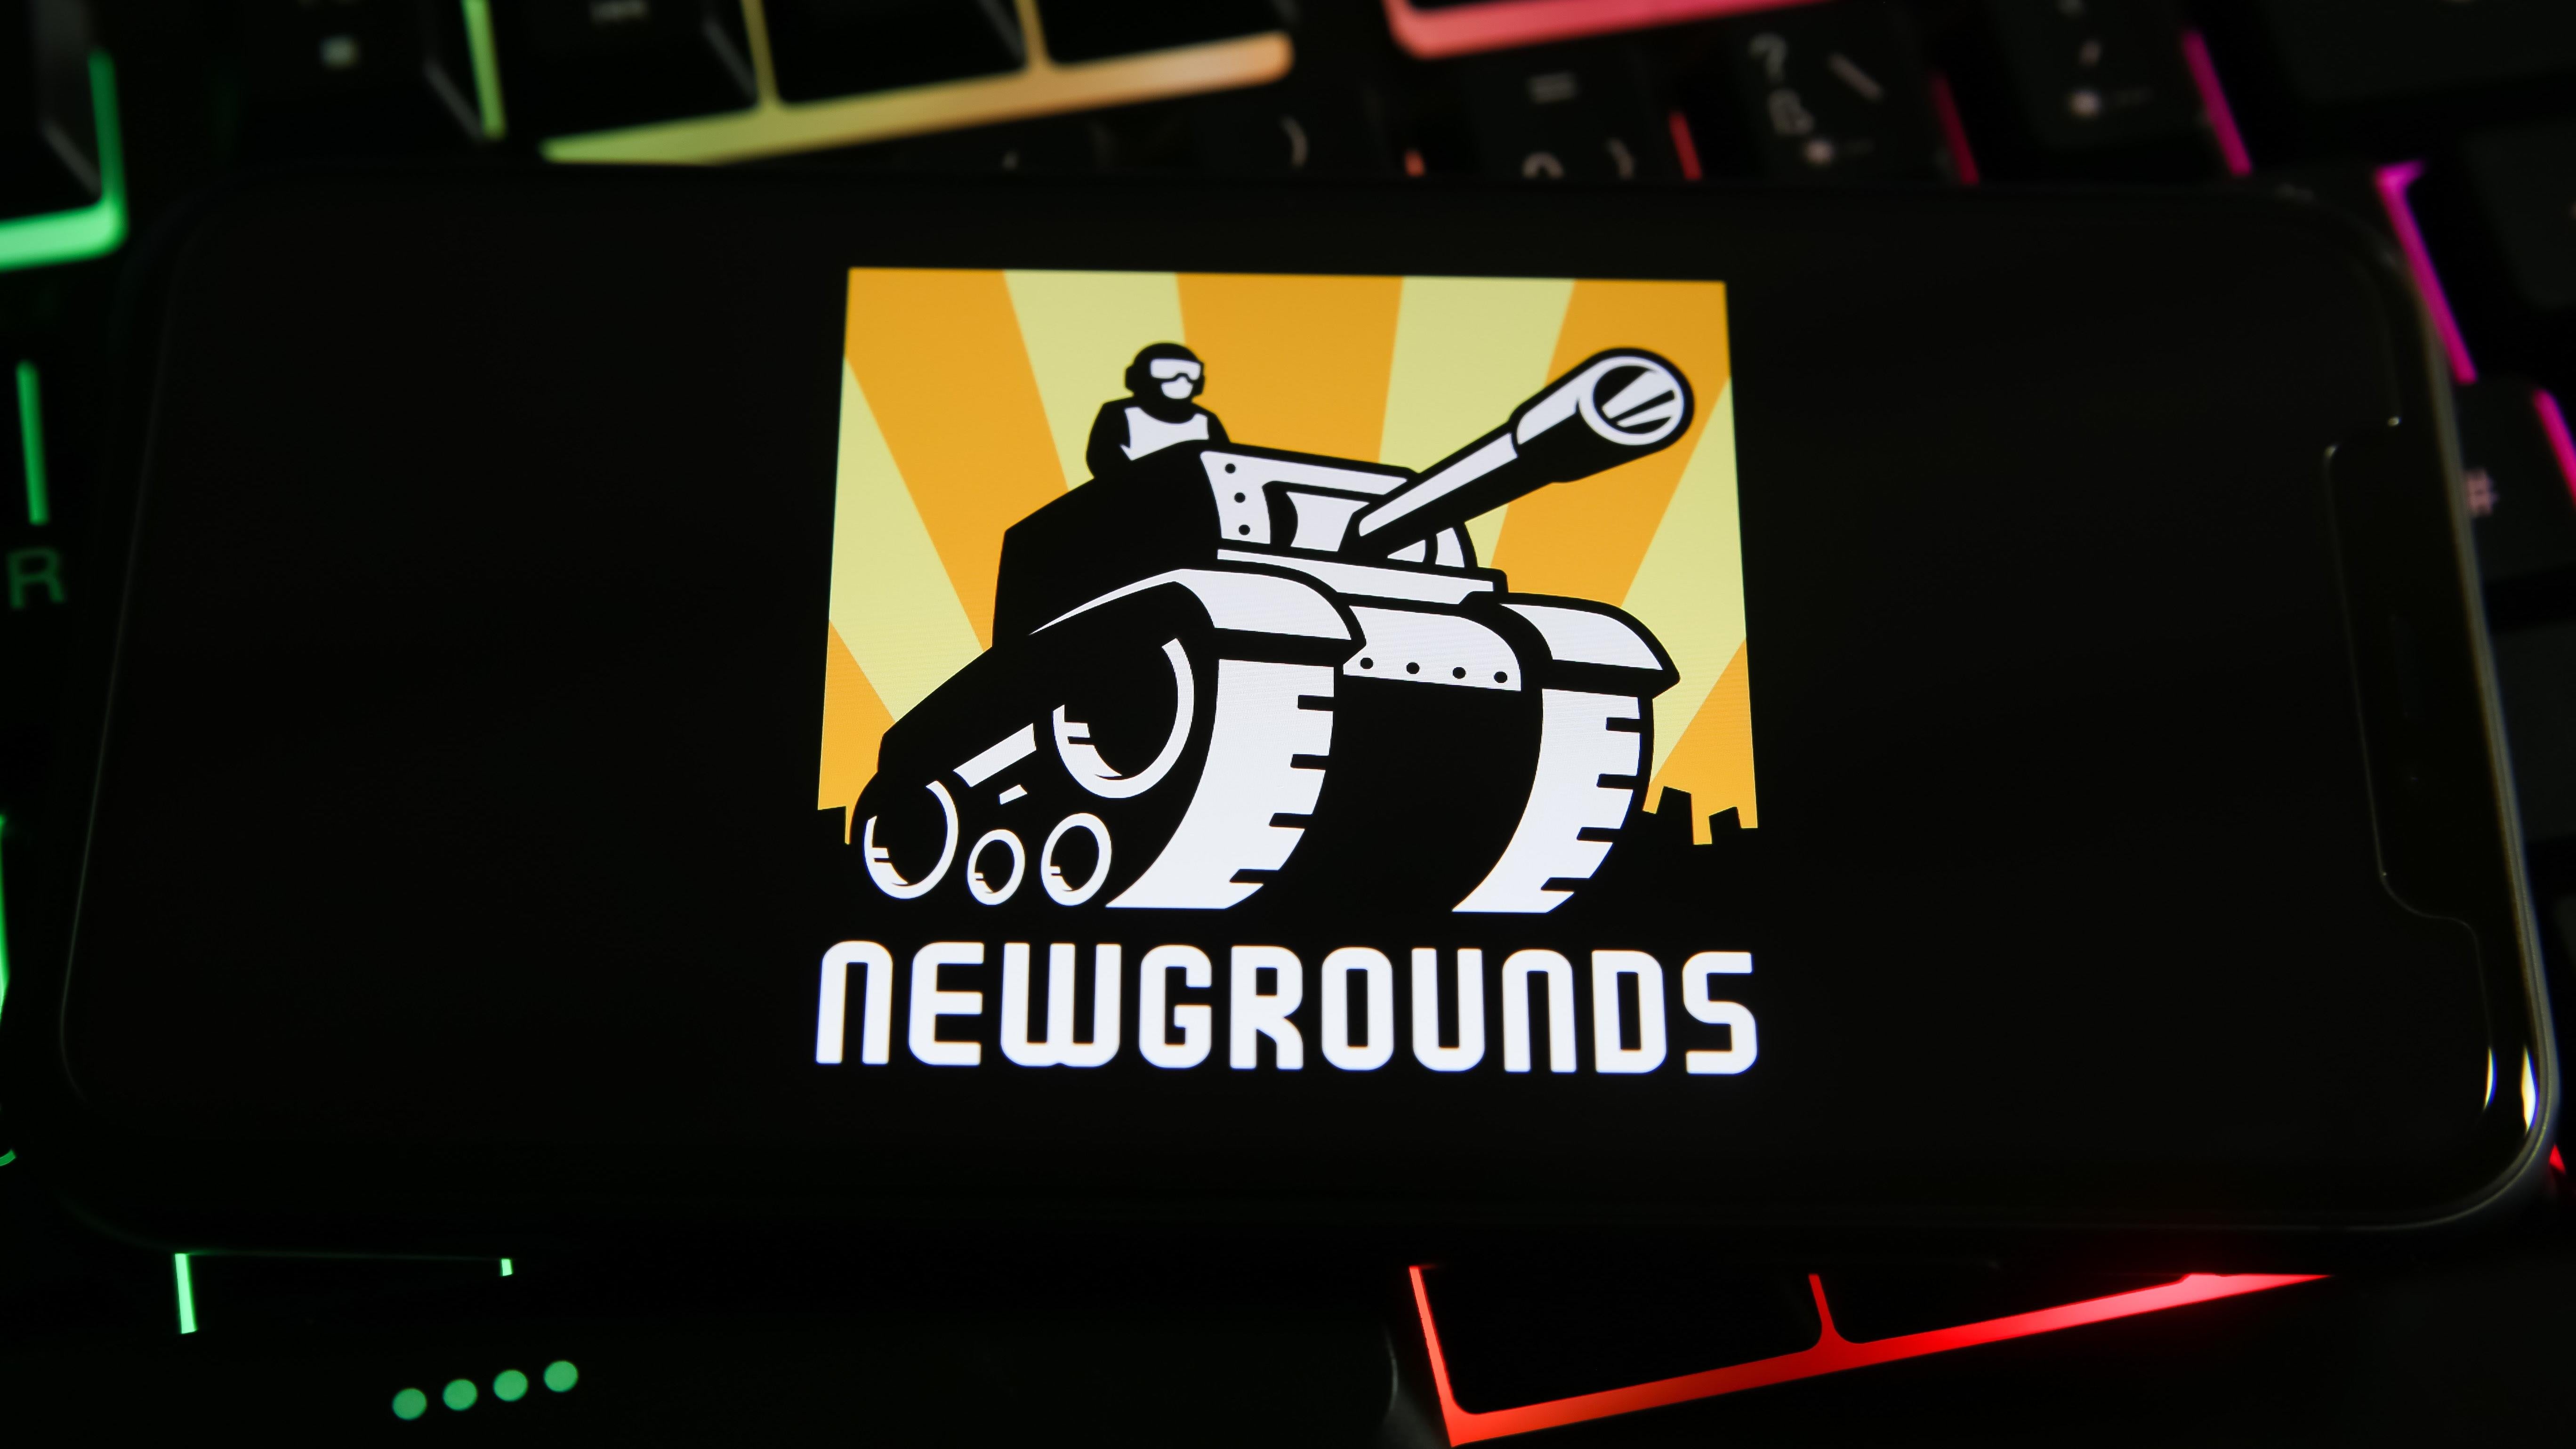 Despite being founded in 1995, Newgrounds has a stated policy that goes much further than other, newer image hosting sties. (Photo: Ralf Liebhold, Shutterstock)